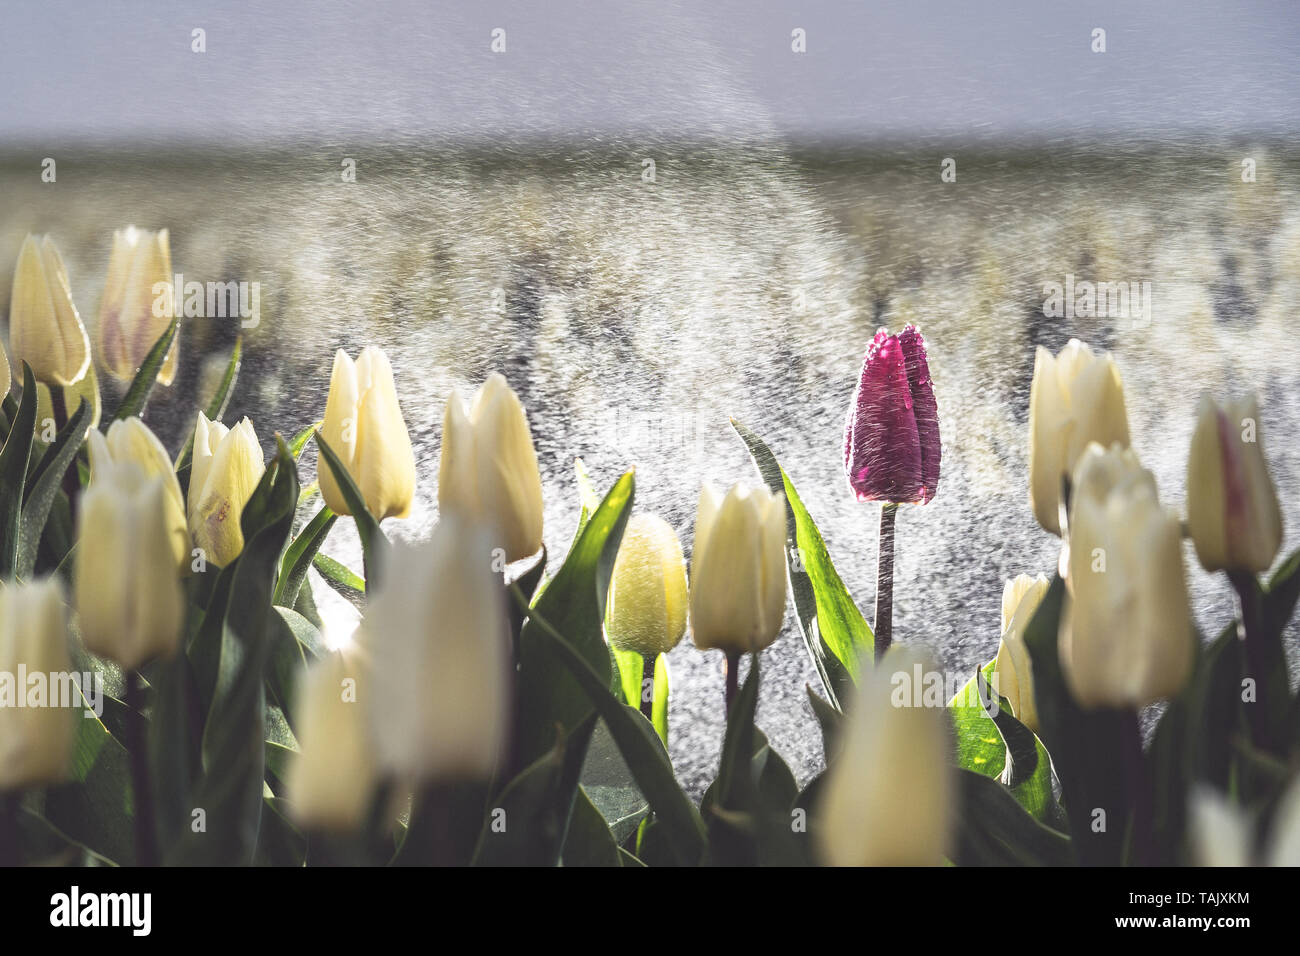 In late April through early May, the tulip fields in the Netherlands colourfully burst into full bloom. Fortunately, there are hundreds of flower fiel Stock Photo